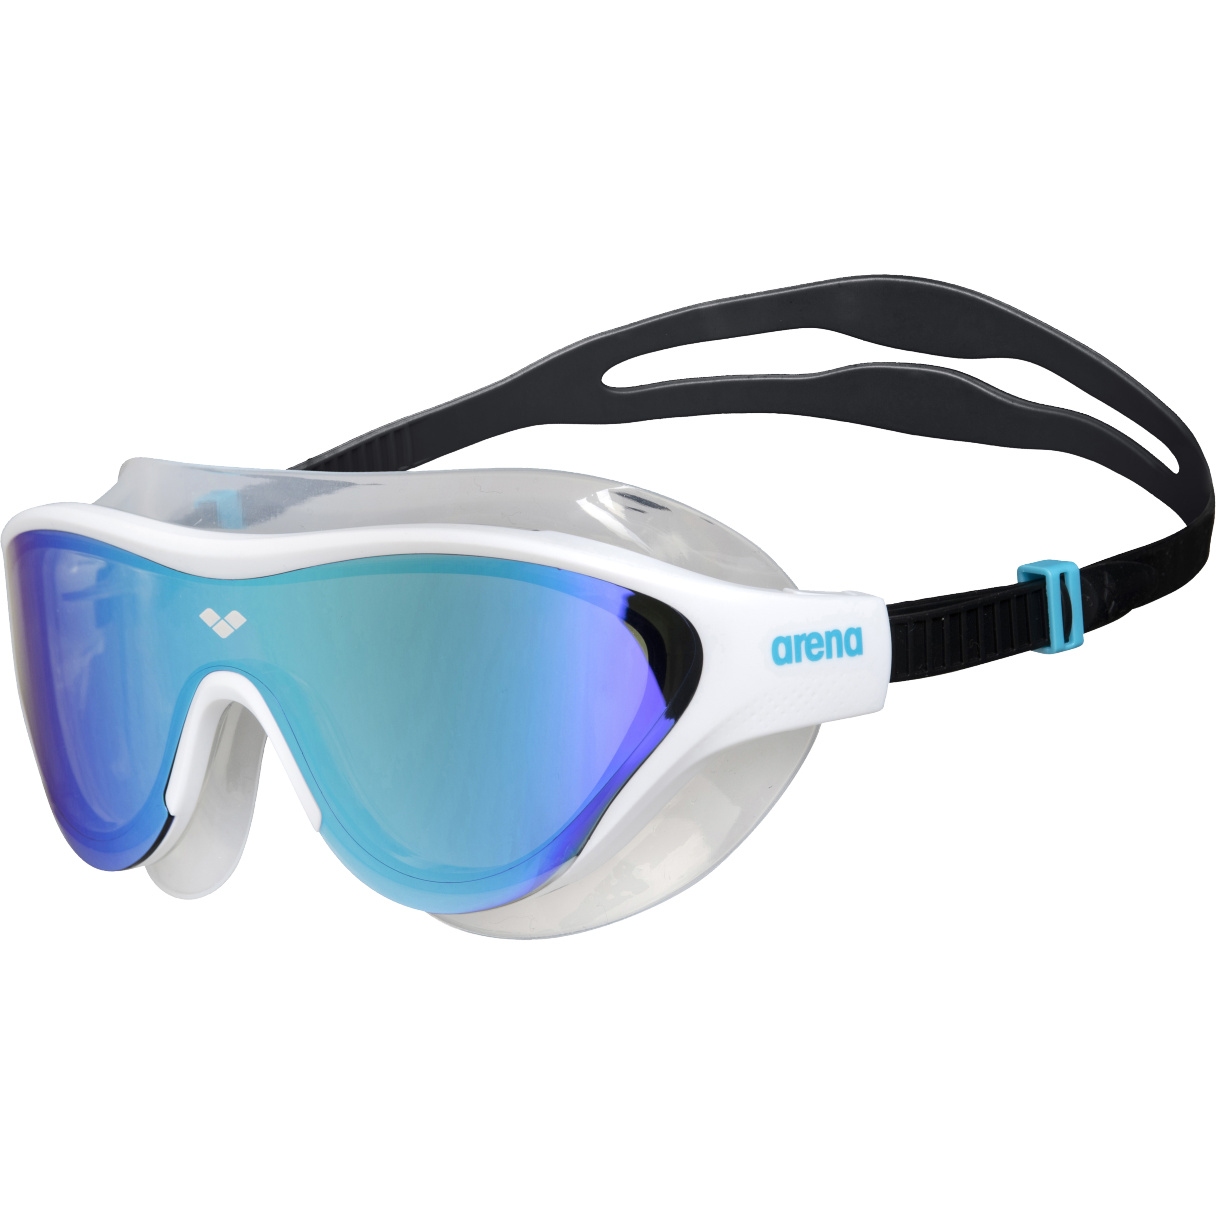 Picture of arena The One Mask Mirror Swimming Goggles - Blue - White/Black